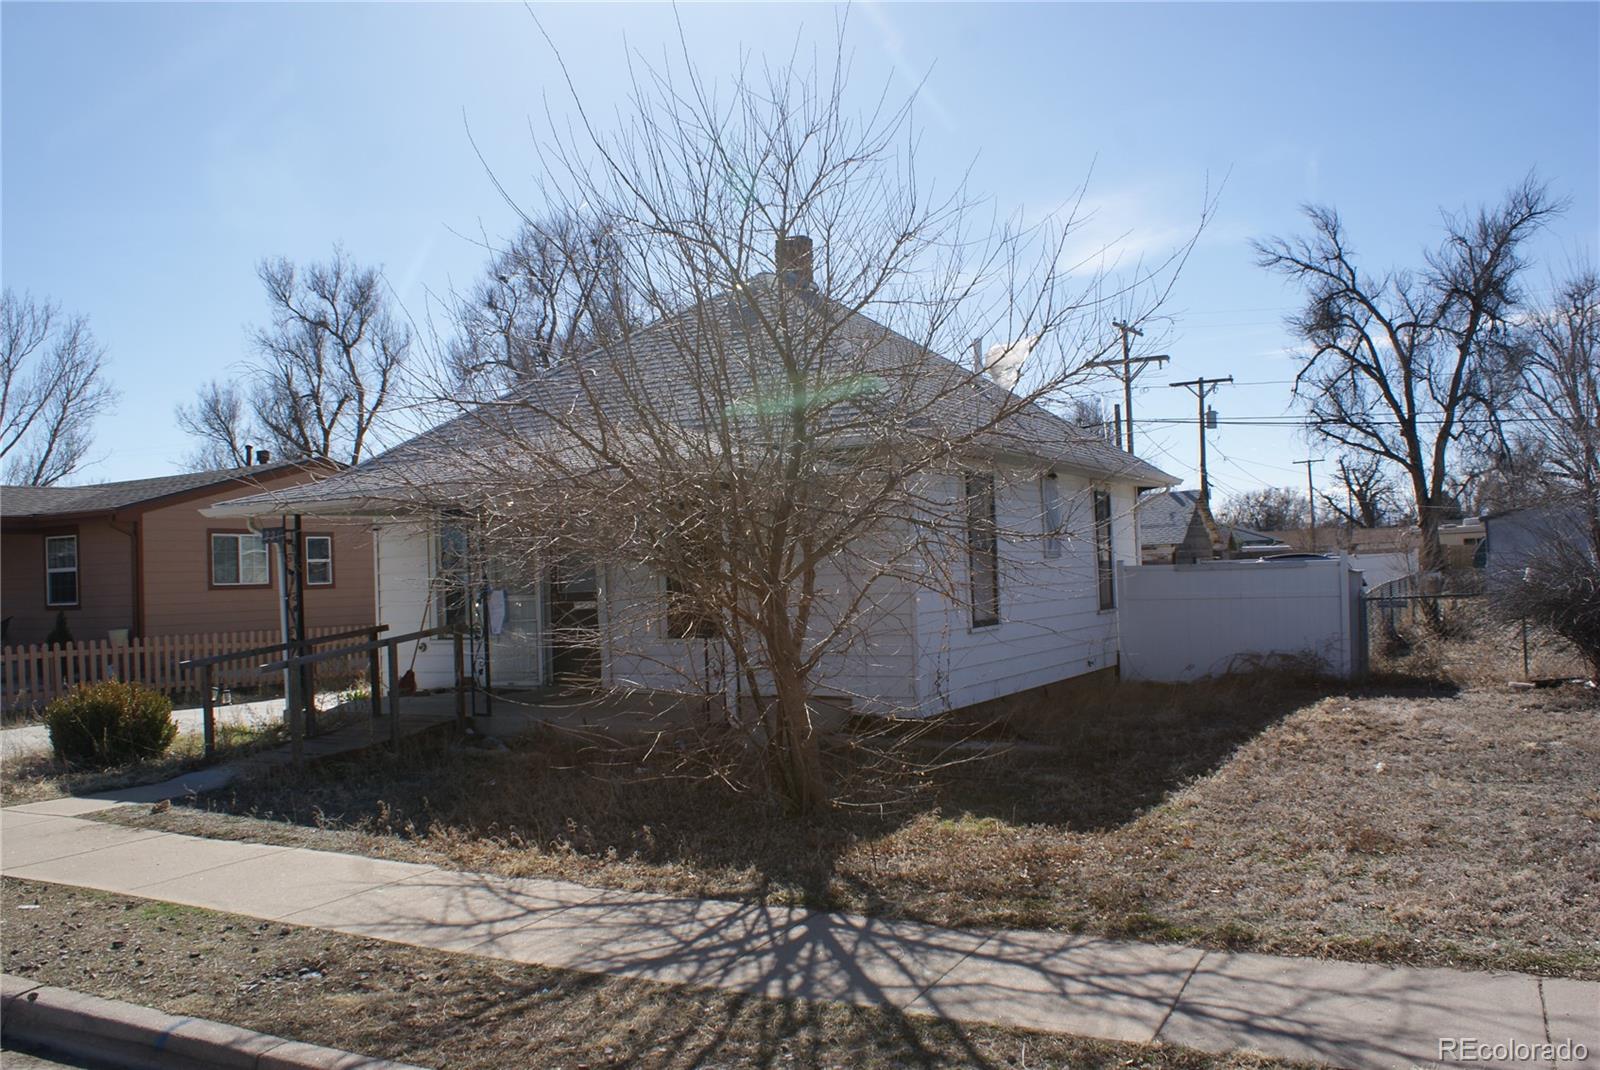 Report Image for 221  Mckinley Avenue,Fort Lupton, Colorado